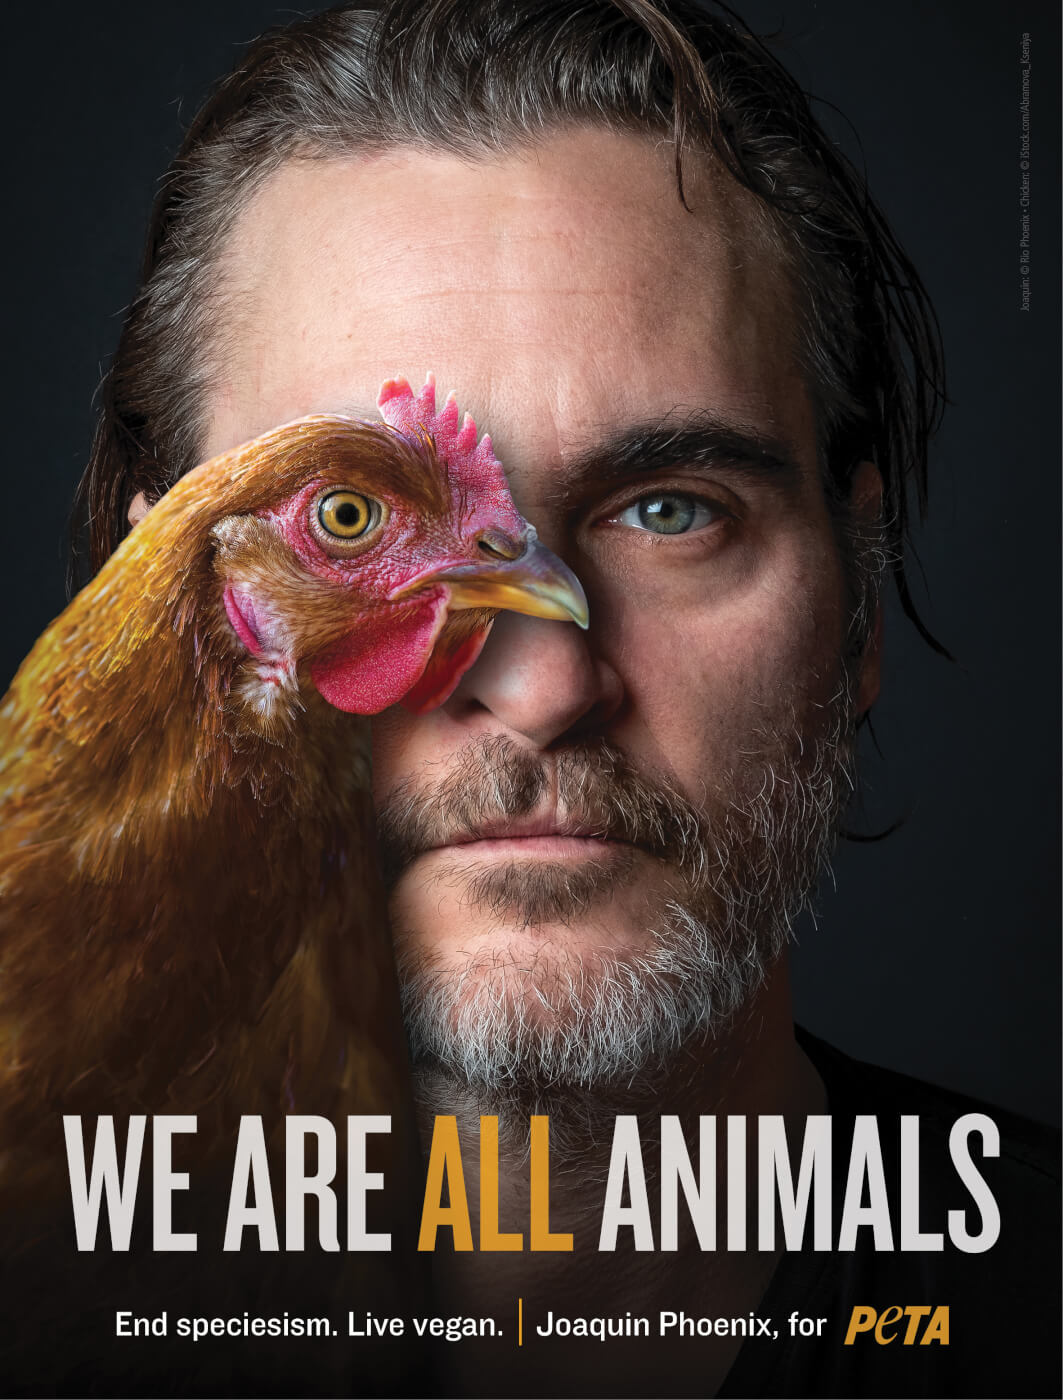 Joaquin Phoenix Reminds Everyone That ‘We Are All Animals’